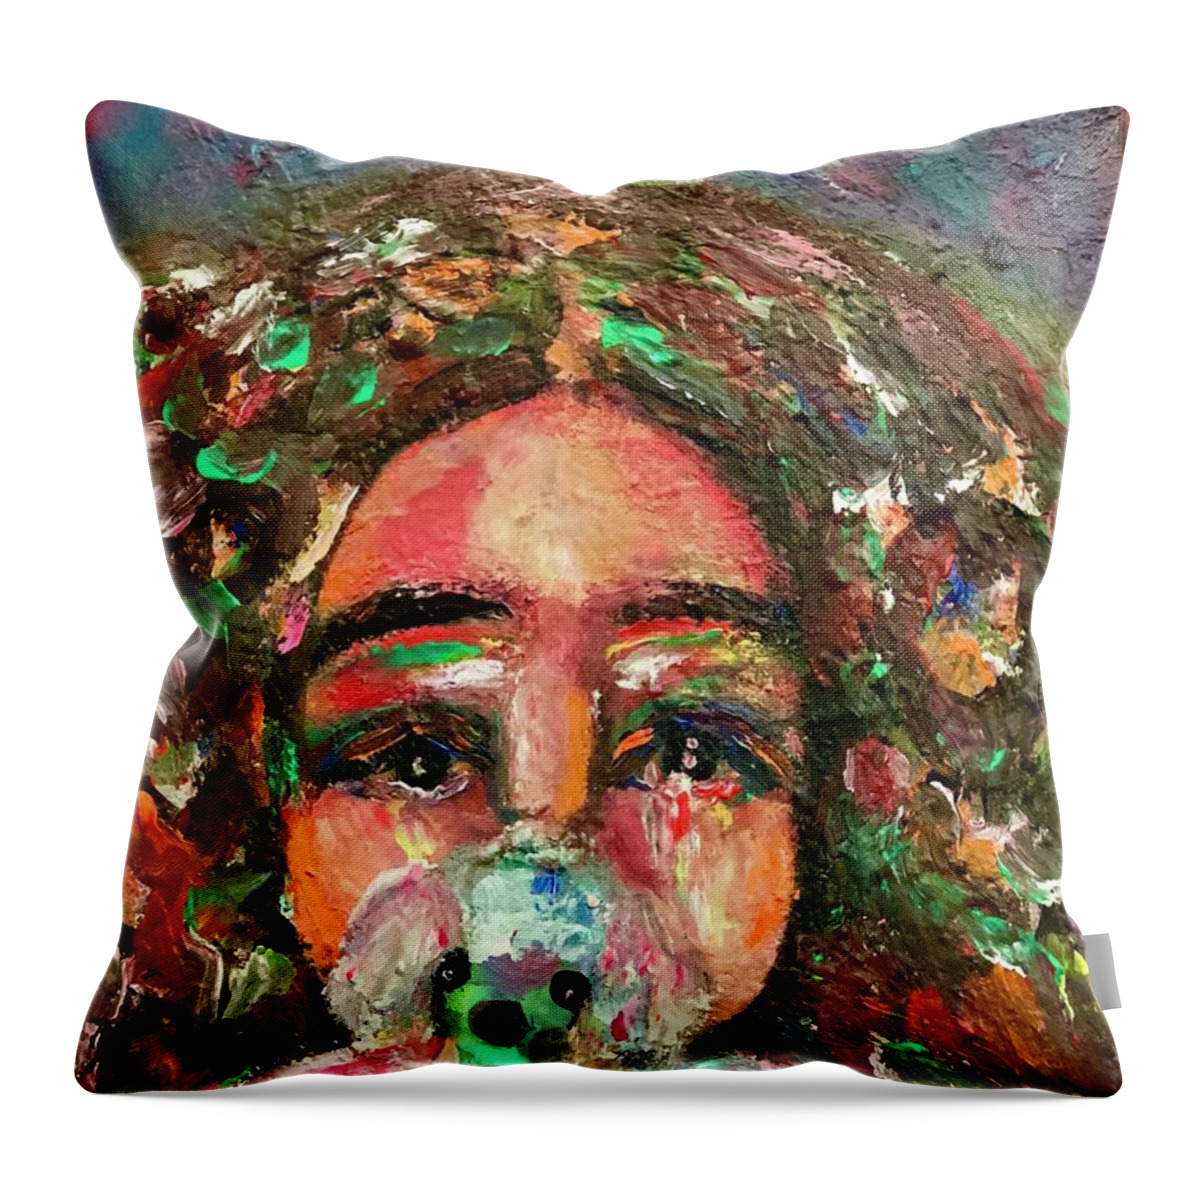  Throw Pillow featuring the painting Why you leave us by Wanvisa Klawklean